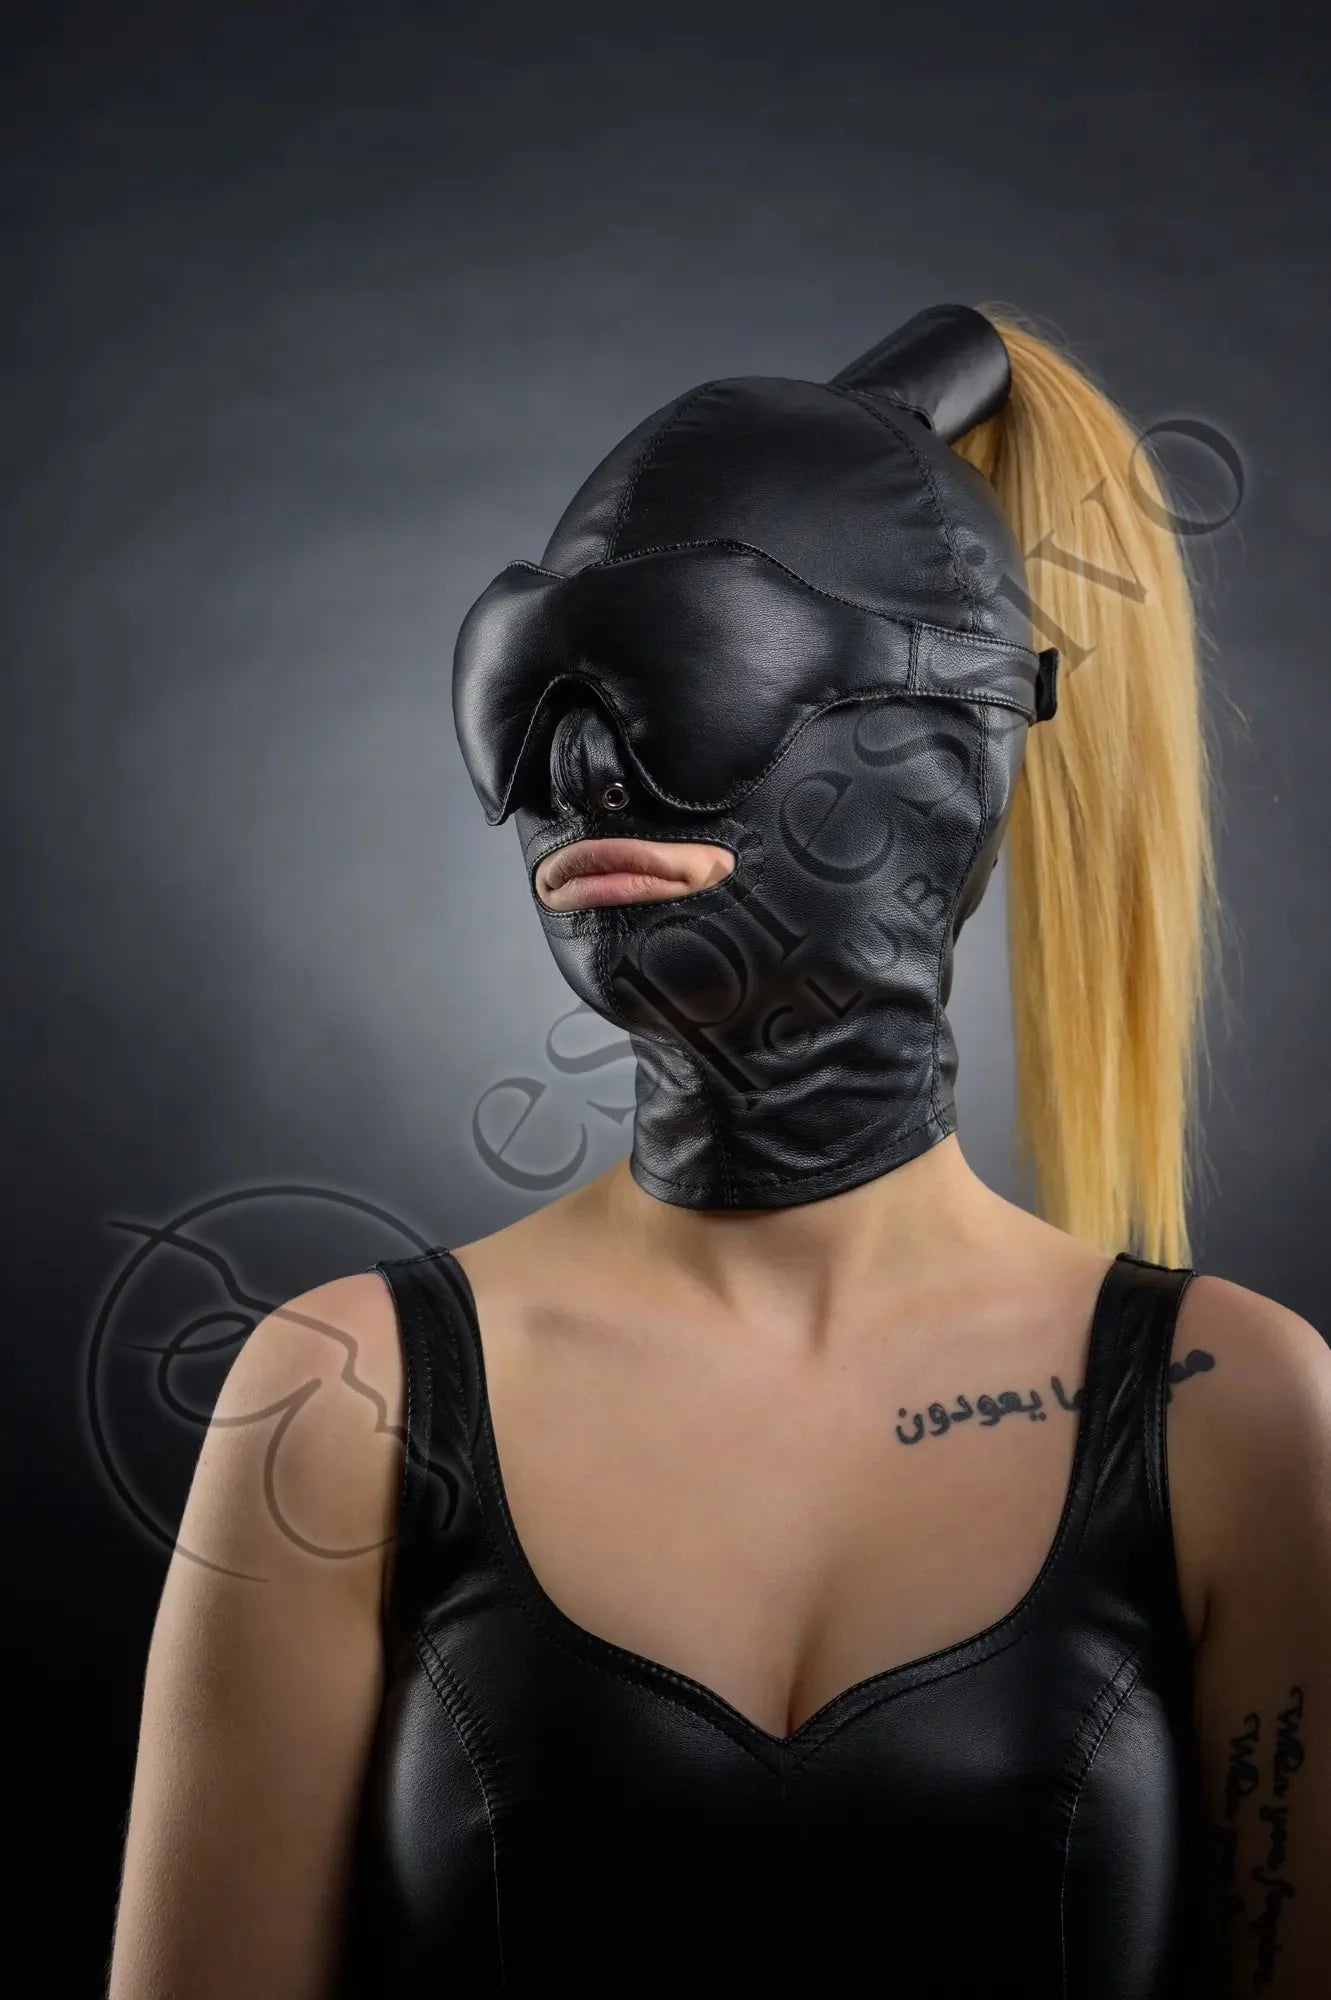 Real Leather BDSM Tight Ponytail Hood with Blindfold & Muffle Gag Mask - Bottom View